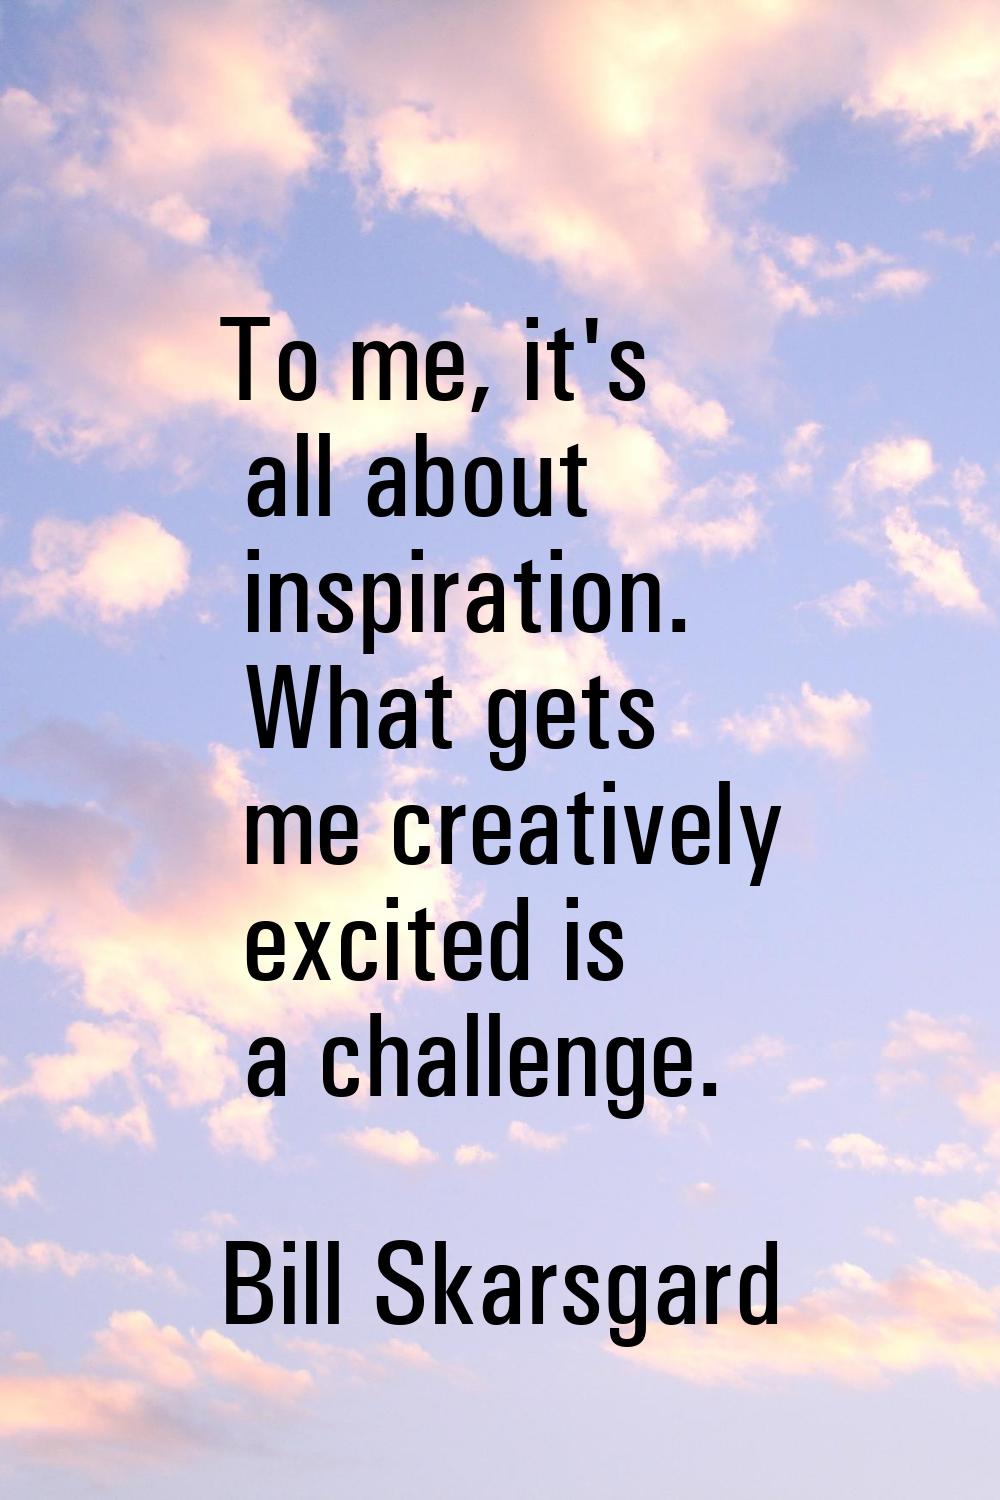 To me, it's all about inspiration. What gets me creatively excited is a challenge.